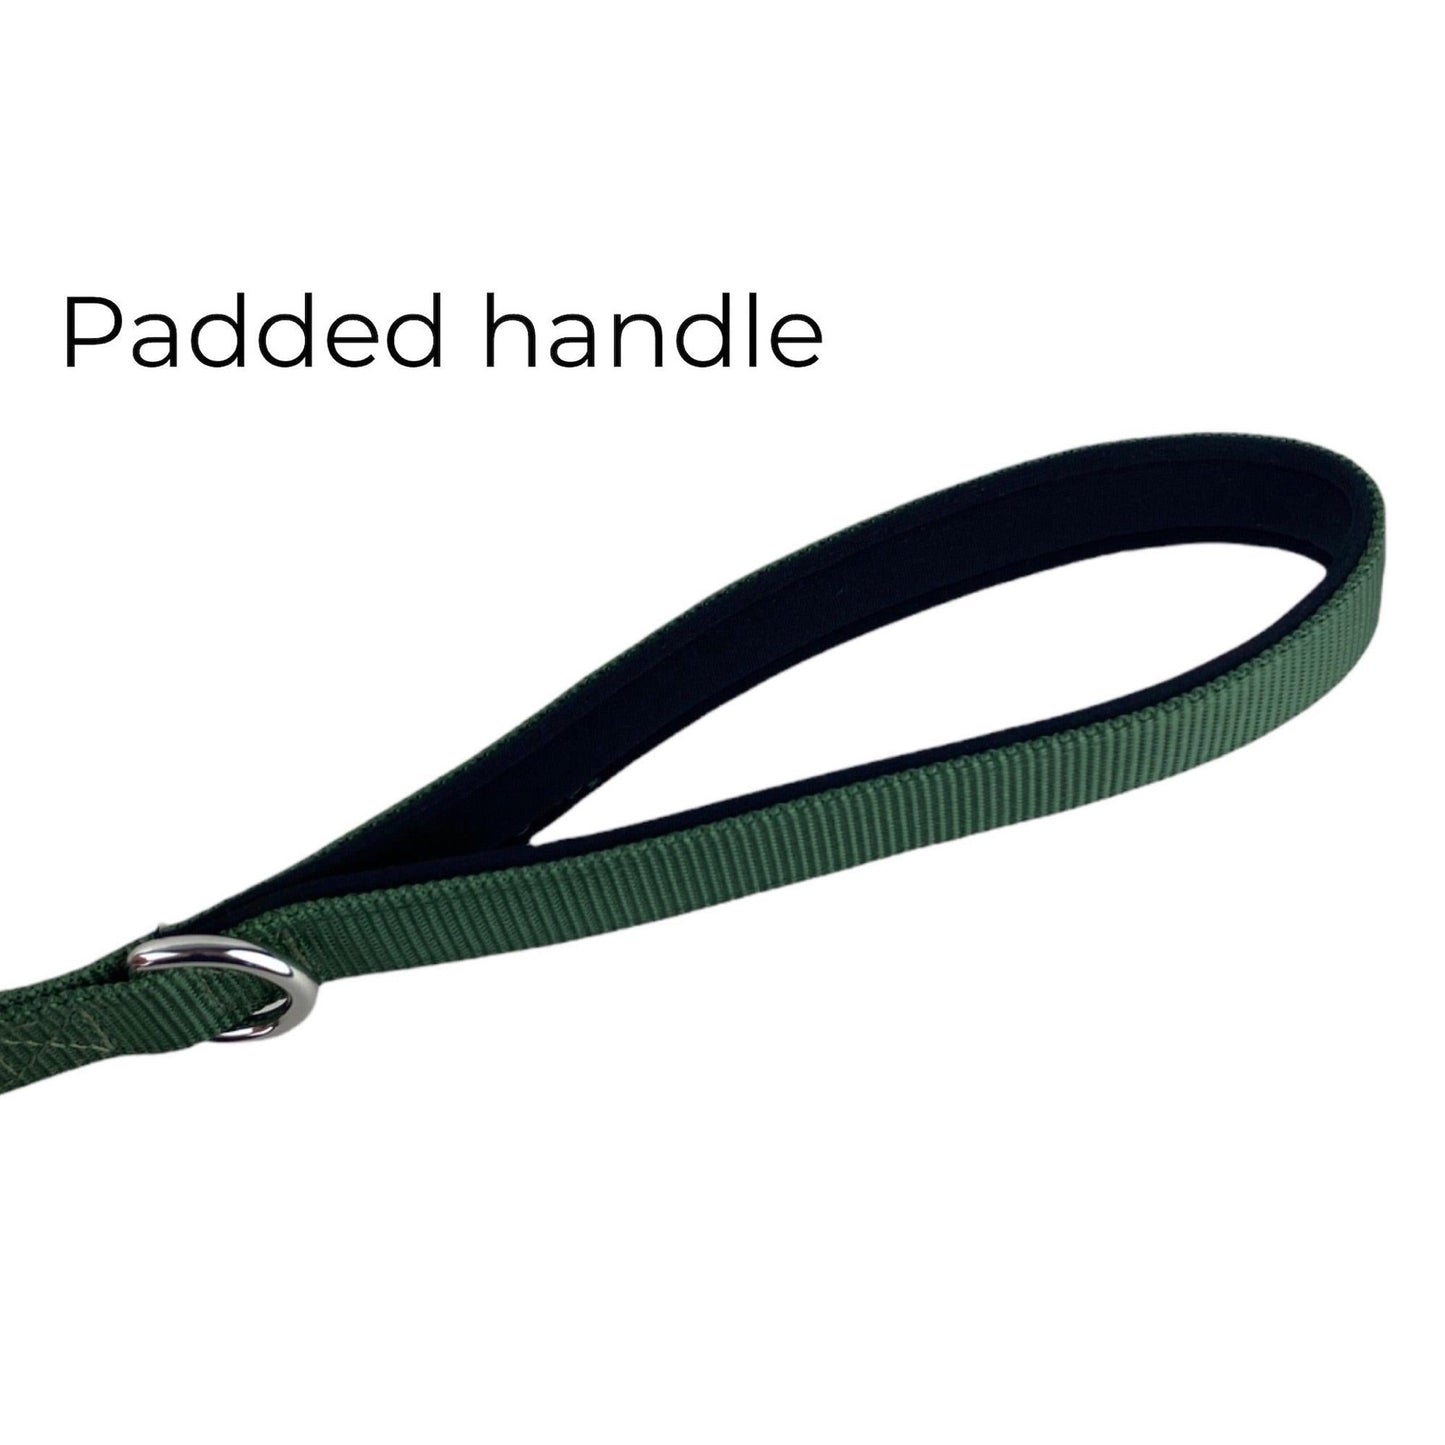 photo of a padded handle of a dog leash from fearless pet